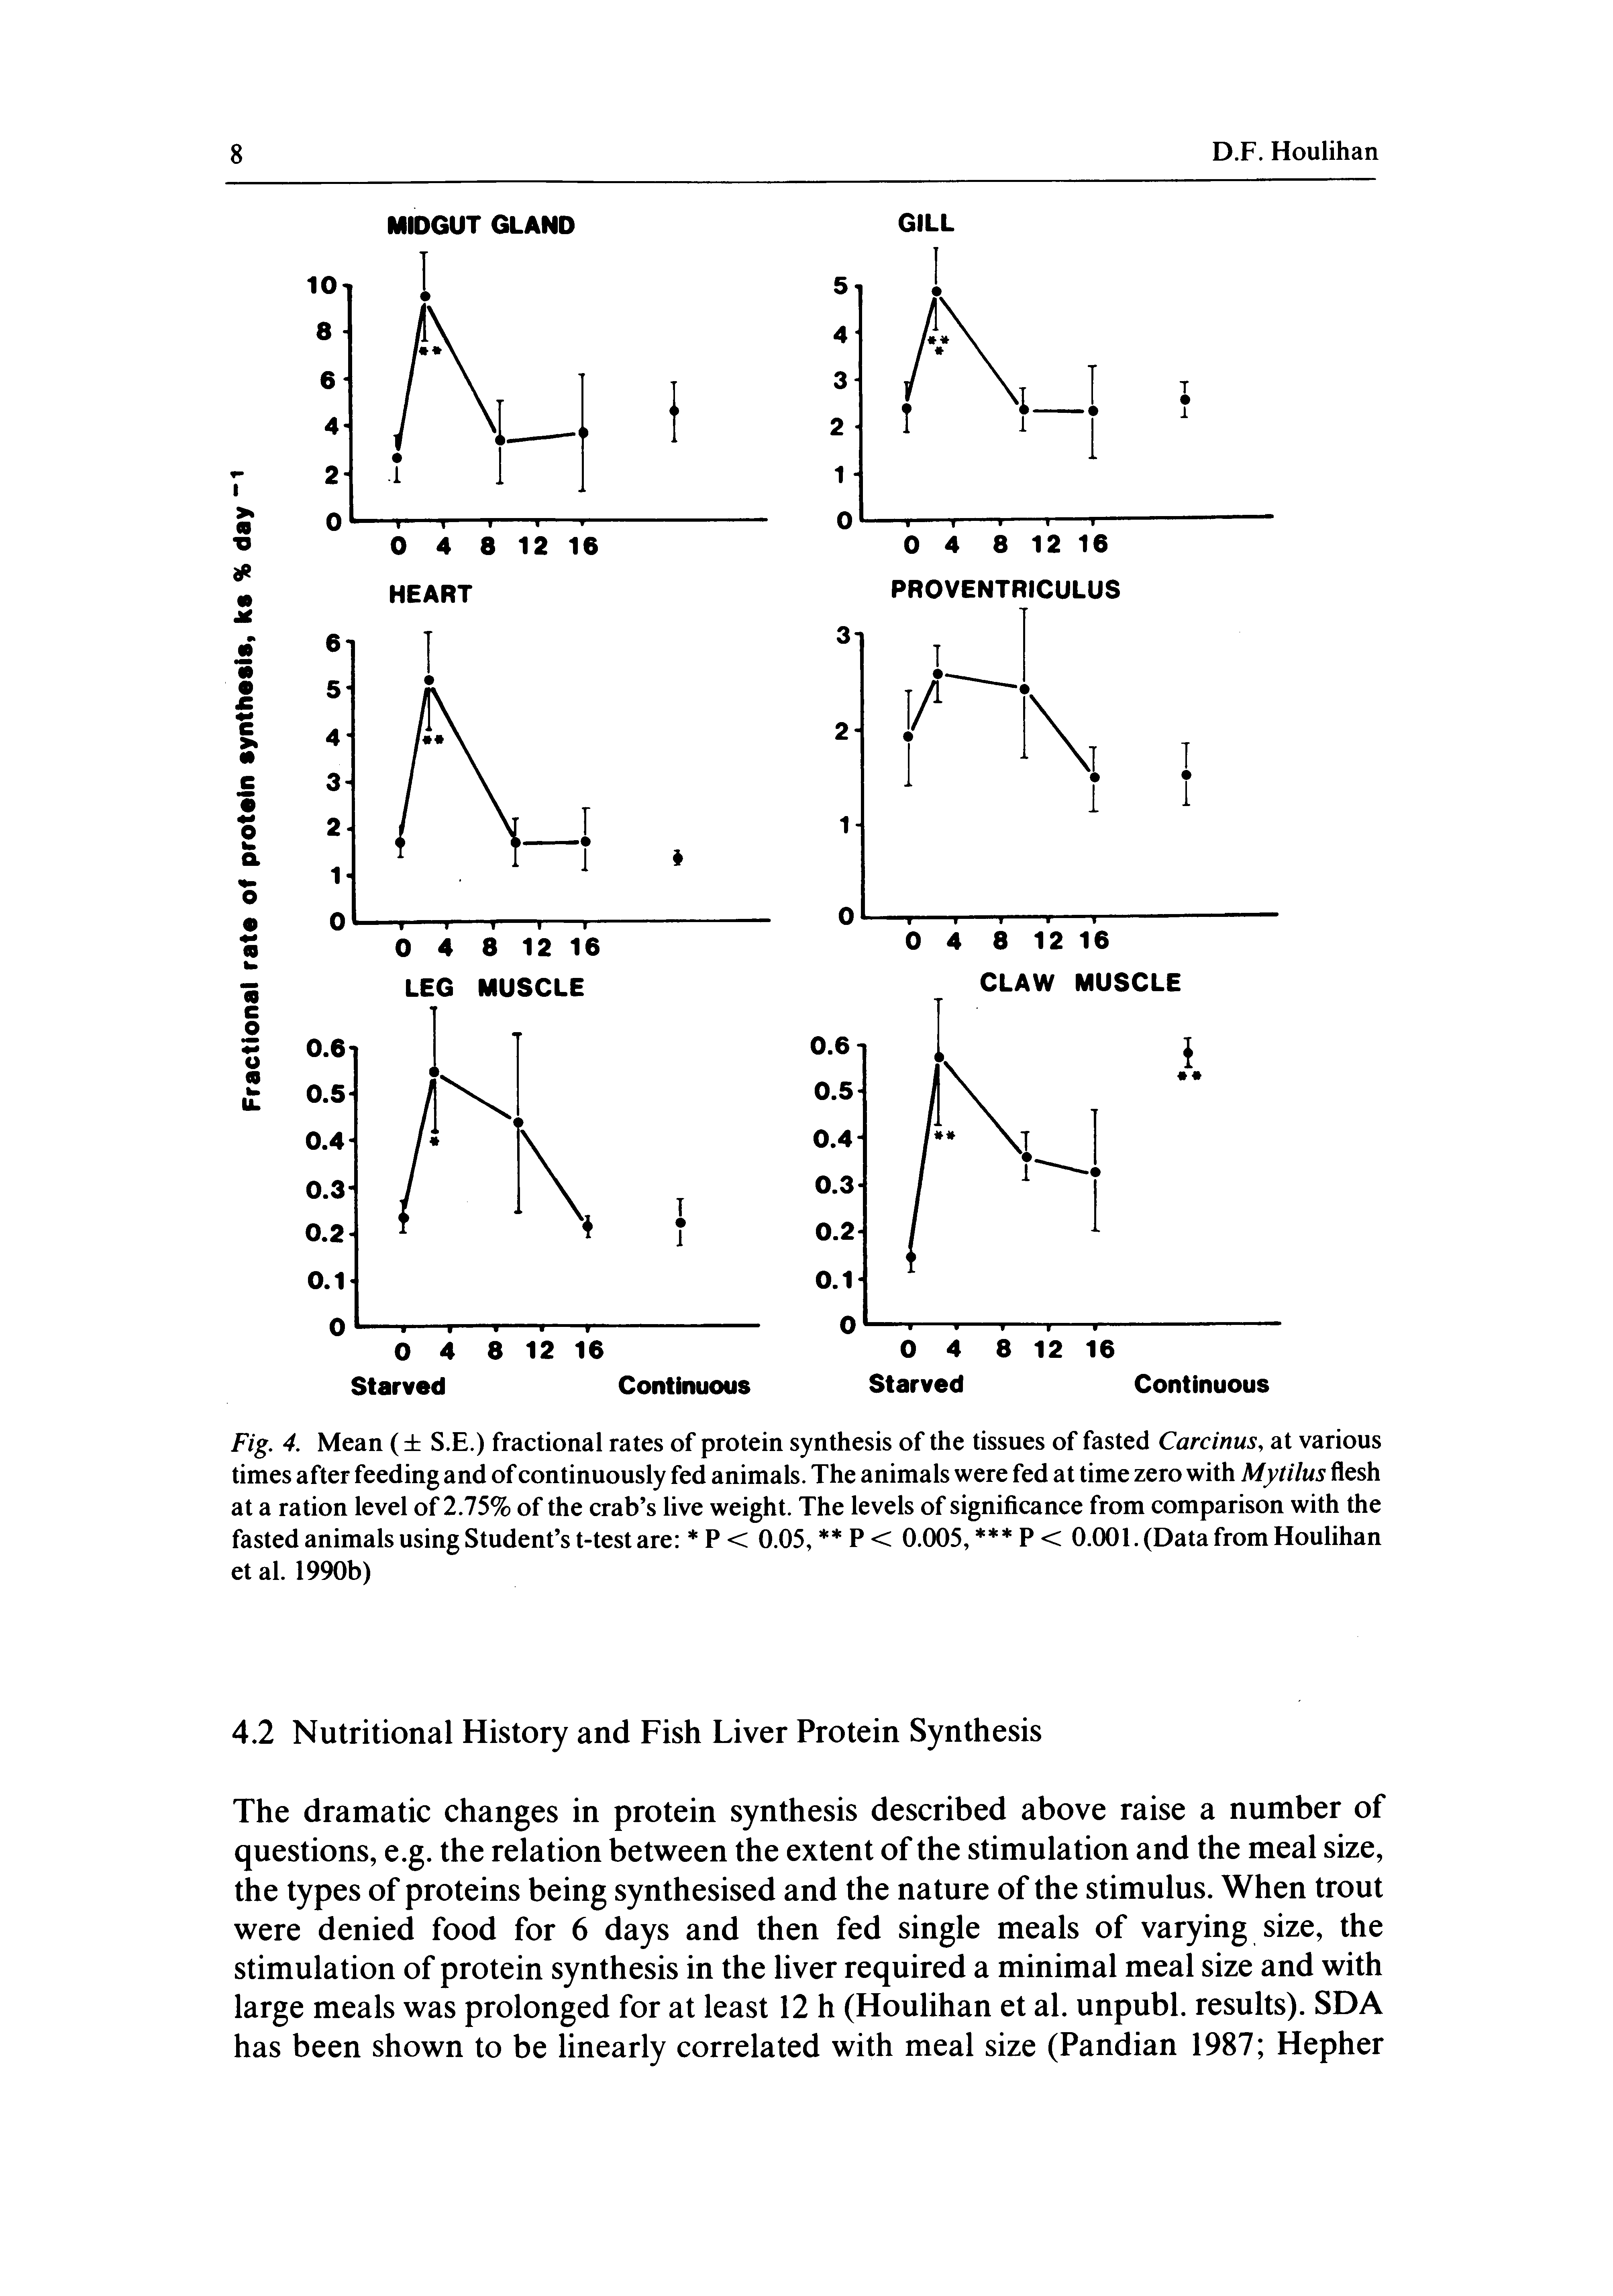 Fig. 4. Mean ( S.E.) fractional rates of protein synthesis of the tissues of fasted Carcinus, at various times after feeding and of continuously fed animals. The animals were fed at time zero with Mytilus flesh at a ration level of 2.75% of the crab s live weight. The levels of significance from comparison with the fasted animals using Student s t-test are P < 0.05, P < 0.005, p < 0.001. (Data from Houlihan etal. 1990b)...